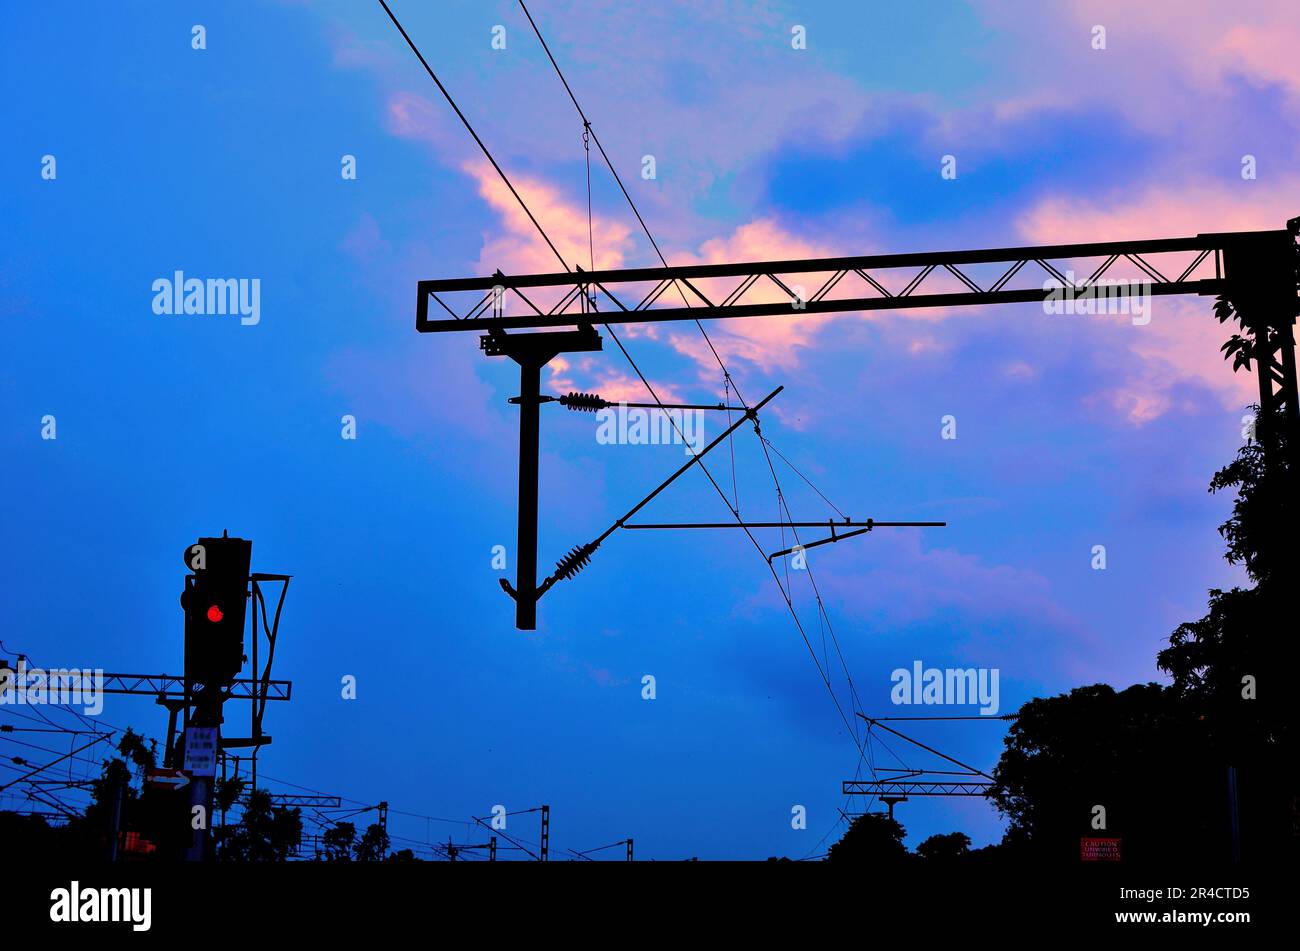 Railway signal and electric wire and post in blue sky Stock Photo